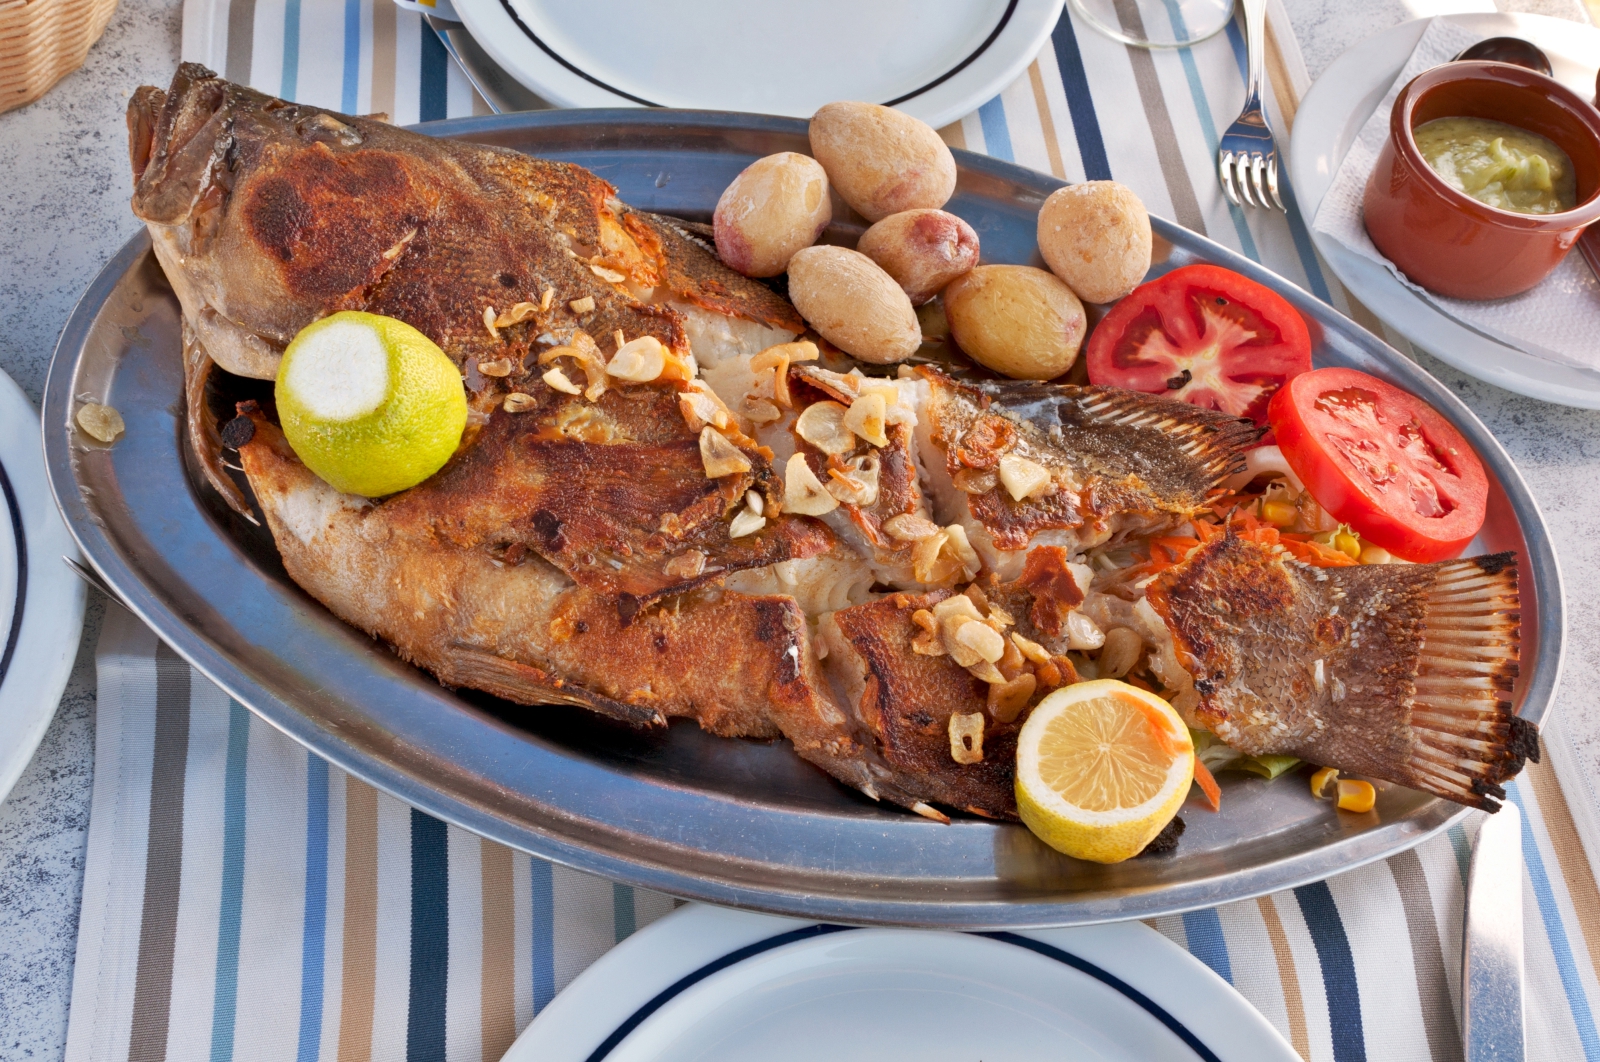 'Typical Canarian Roasted sea fish on plate with tomatoes, potatoes, lemon and spices' - Lanzarote